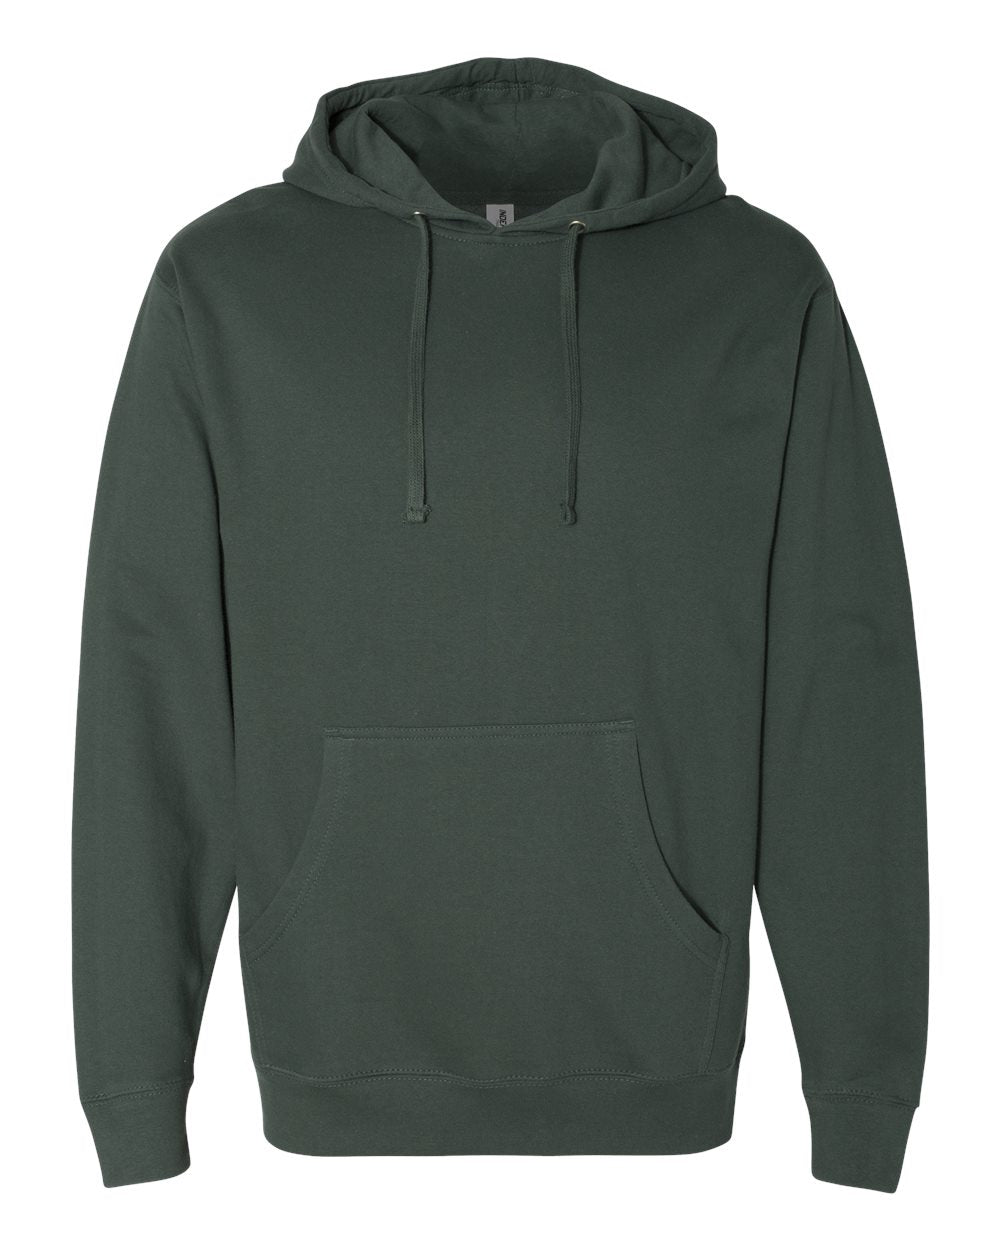 Independent Trading Co. Midweight Hooded Sweatshirt SS4500 #color_Alpine Green